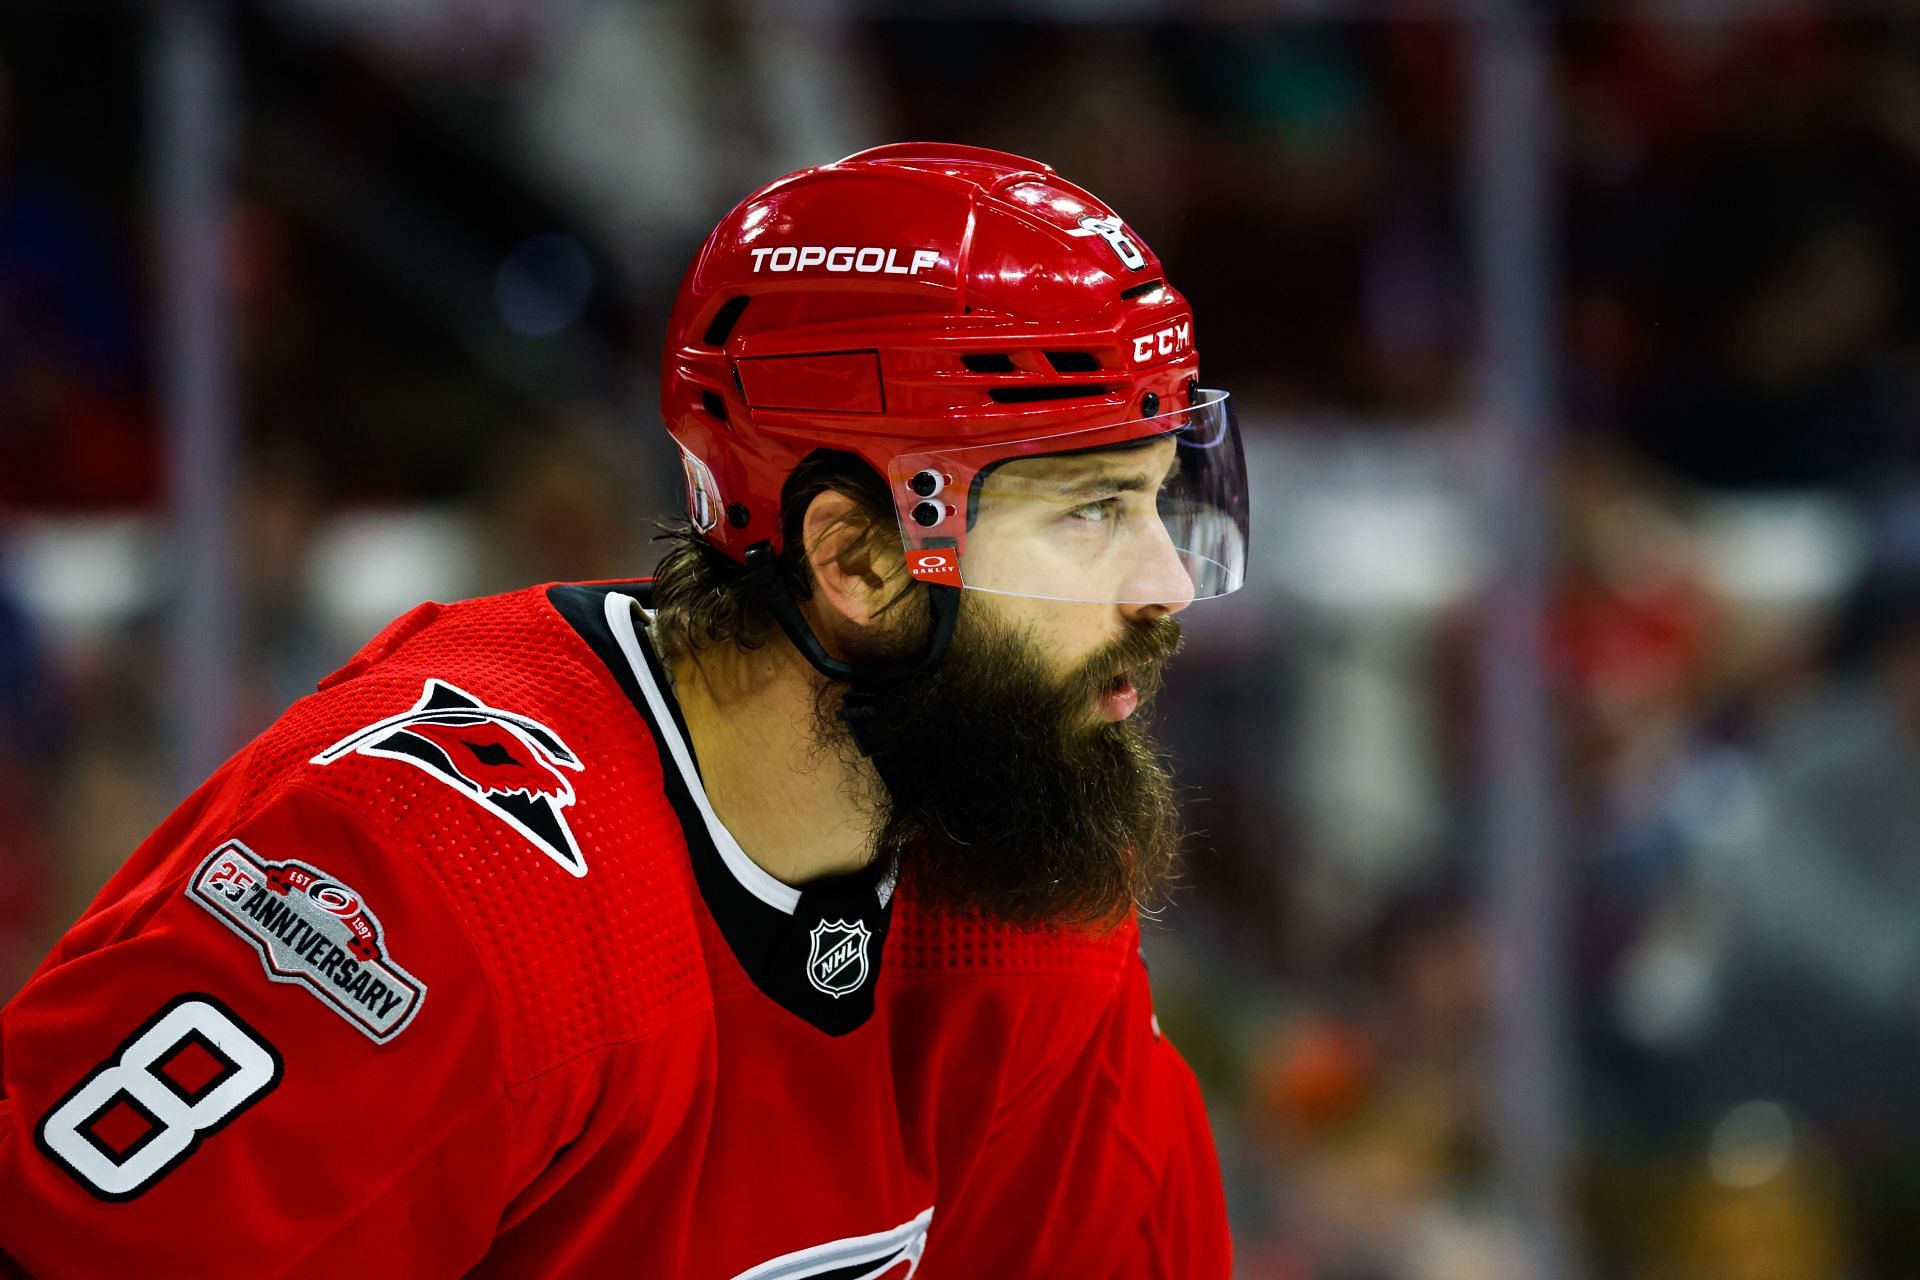 Brent Burns TRADED To The Carolina Hurricanes! AND MORE 